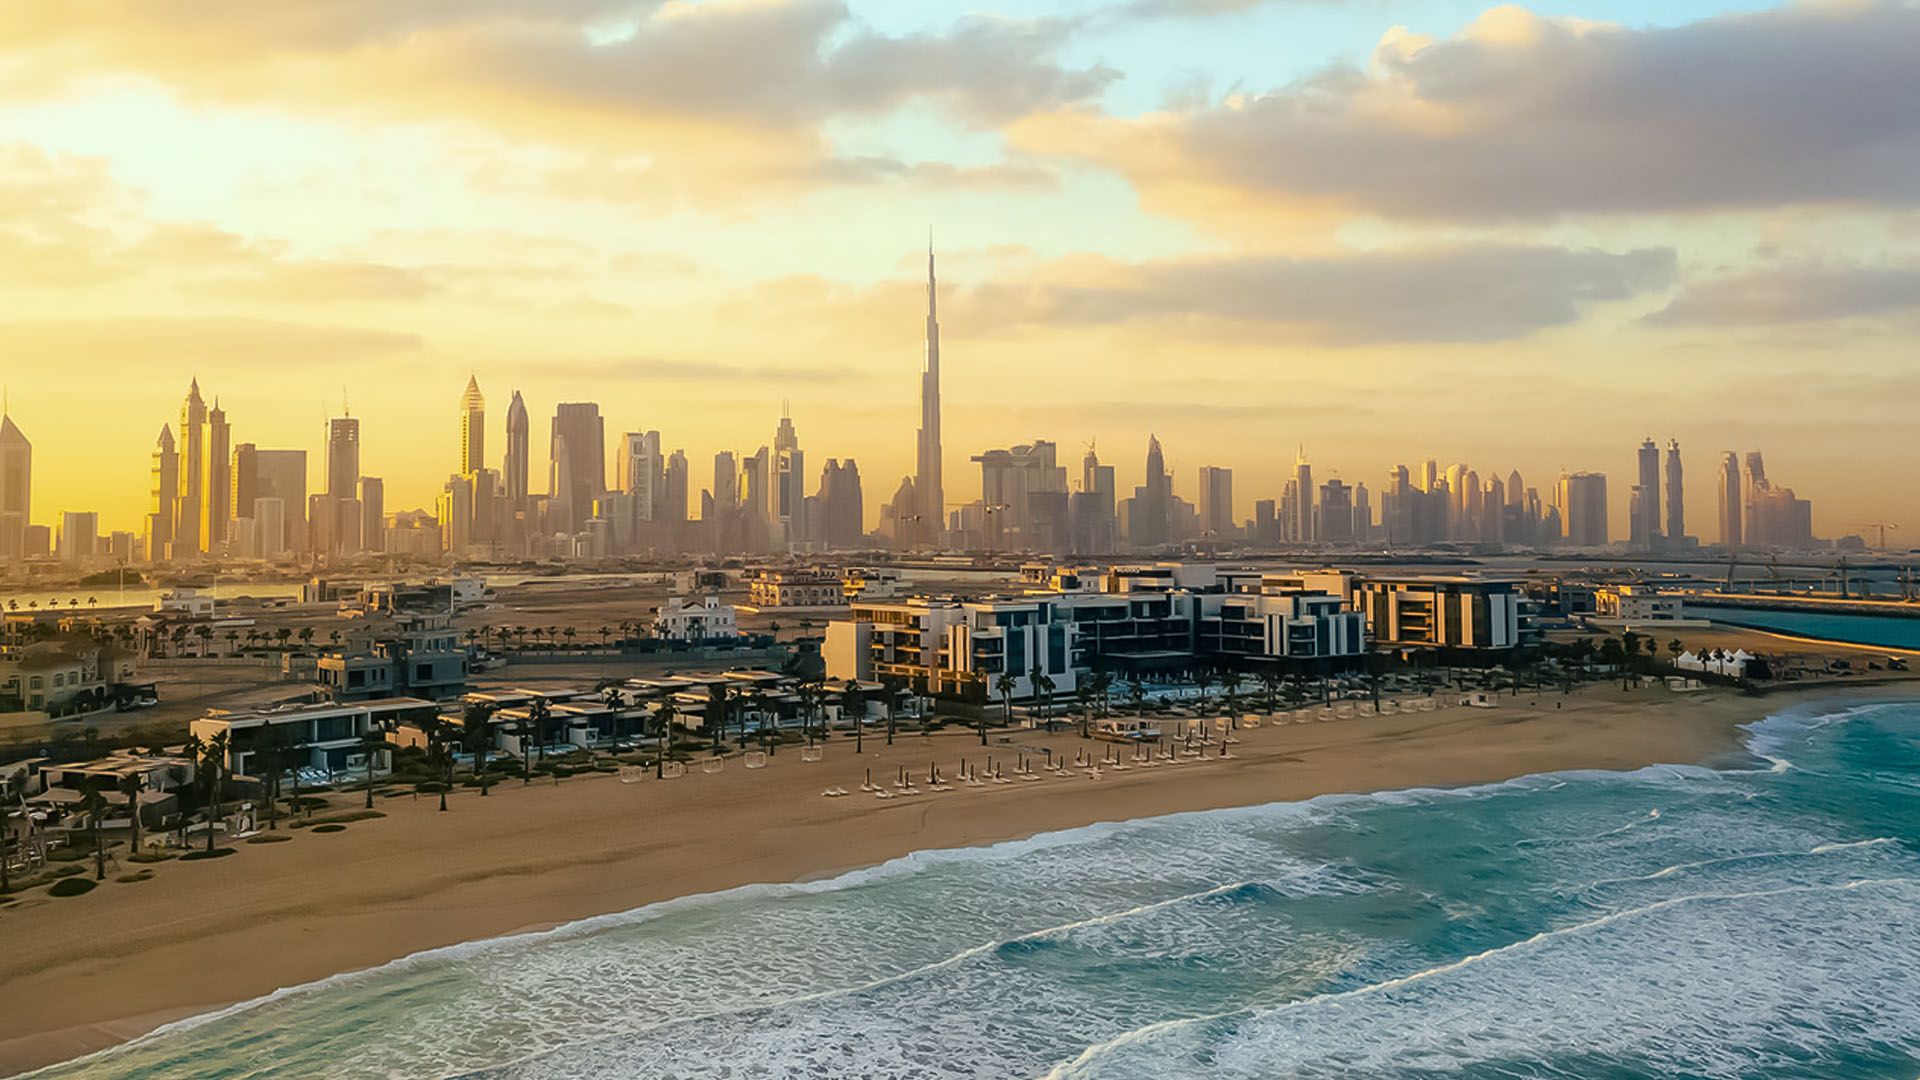 UAE tourism sector performance in Q1 2022 exceeds pre-pandemic levels